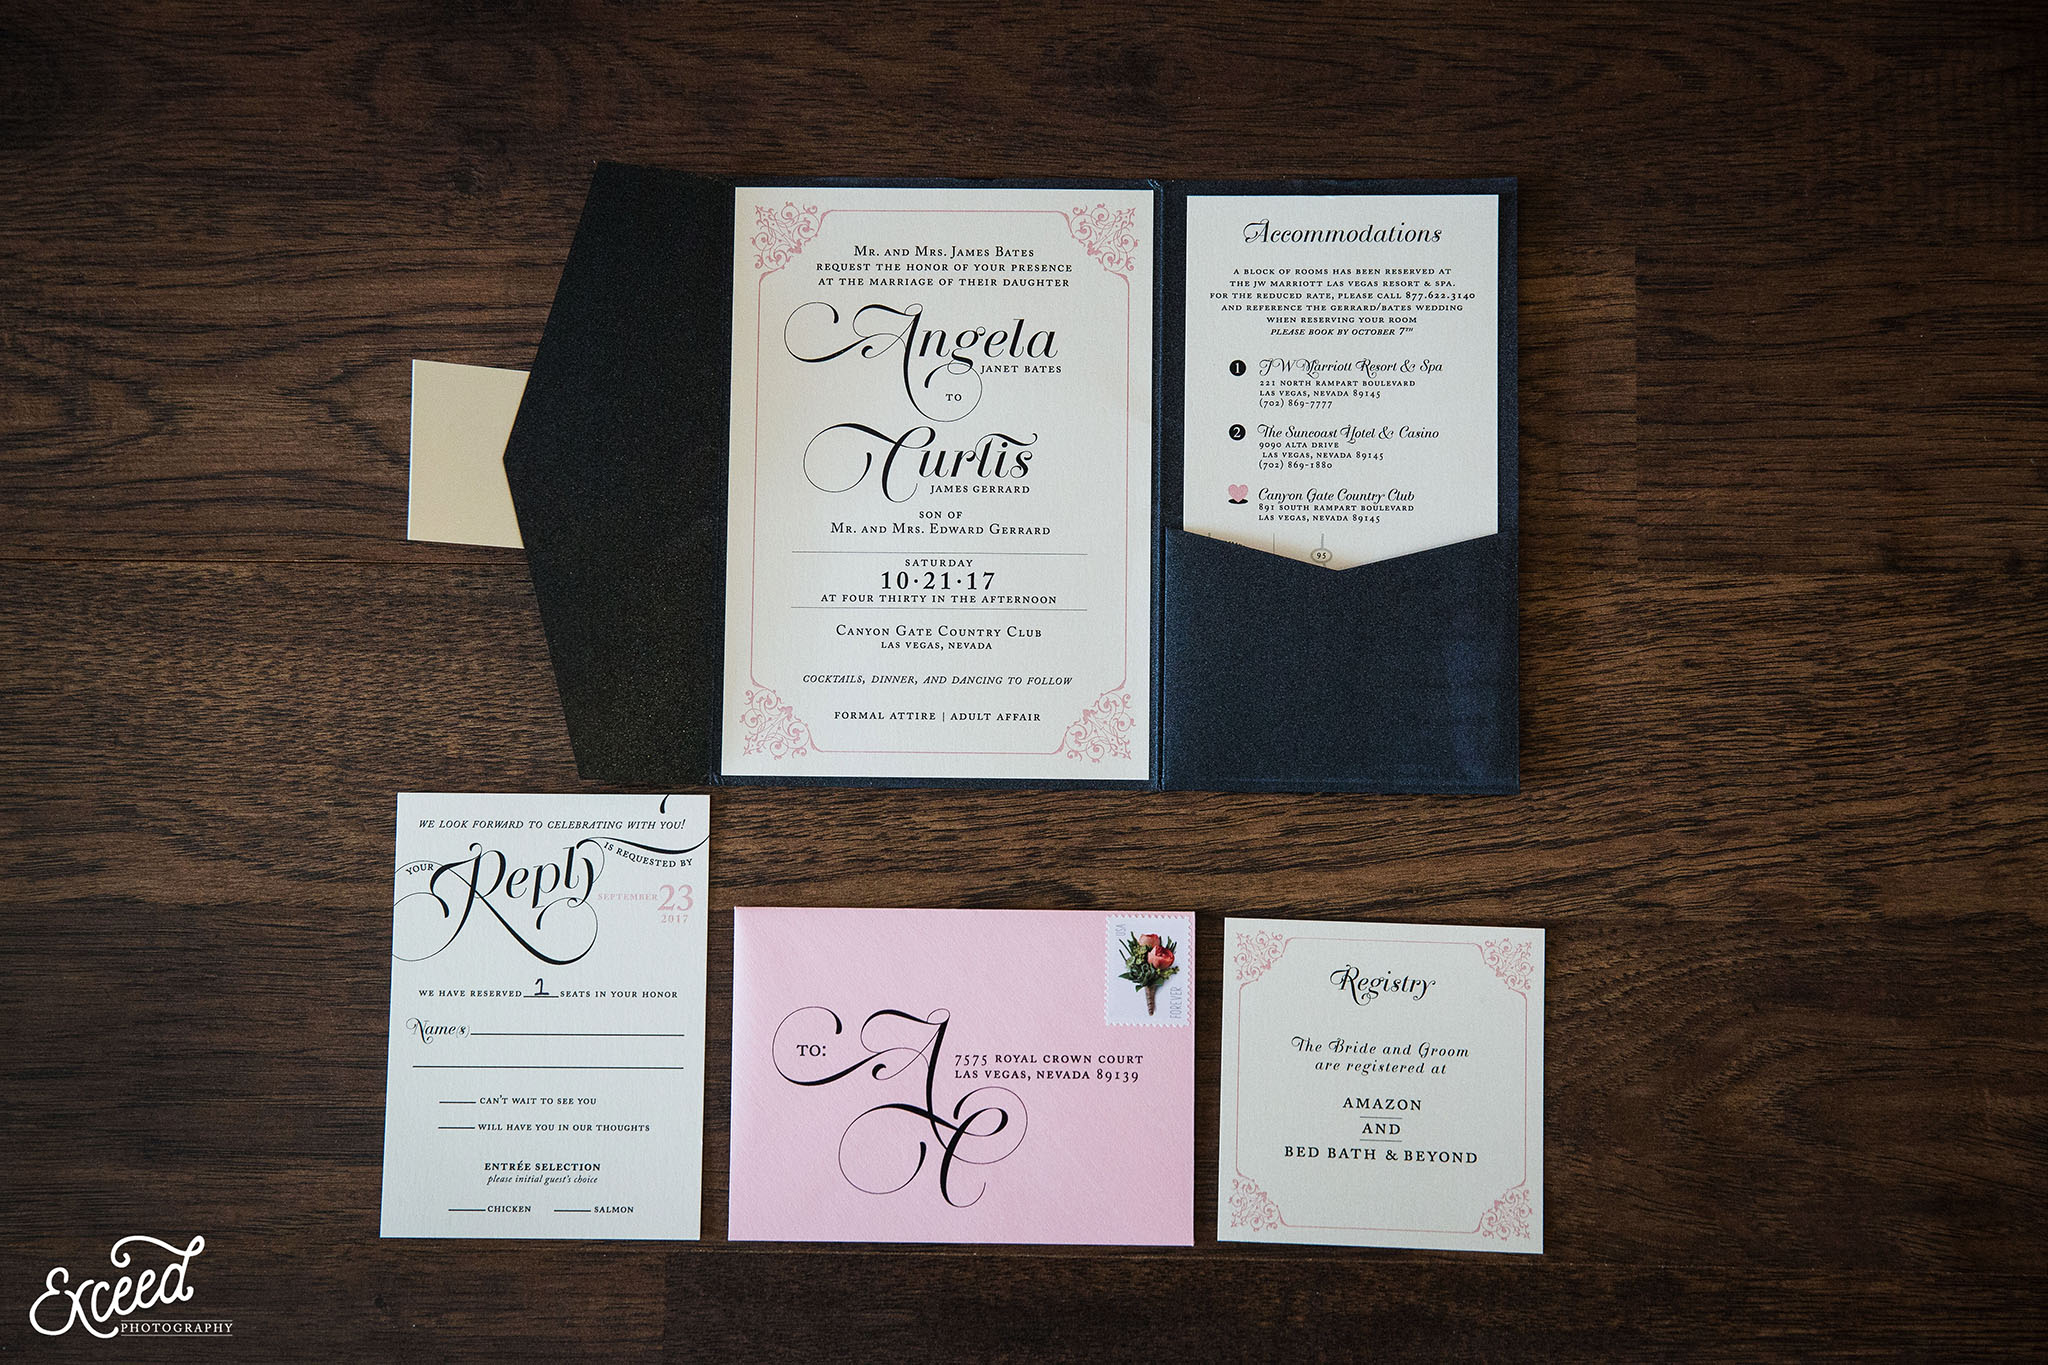 Beautiful invitations for Canyon Gate Country Club fall wedding 